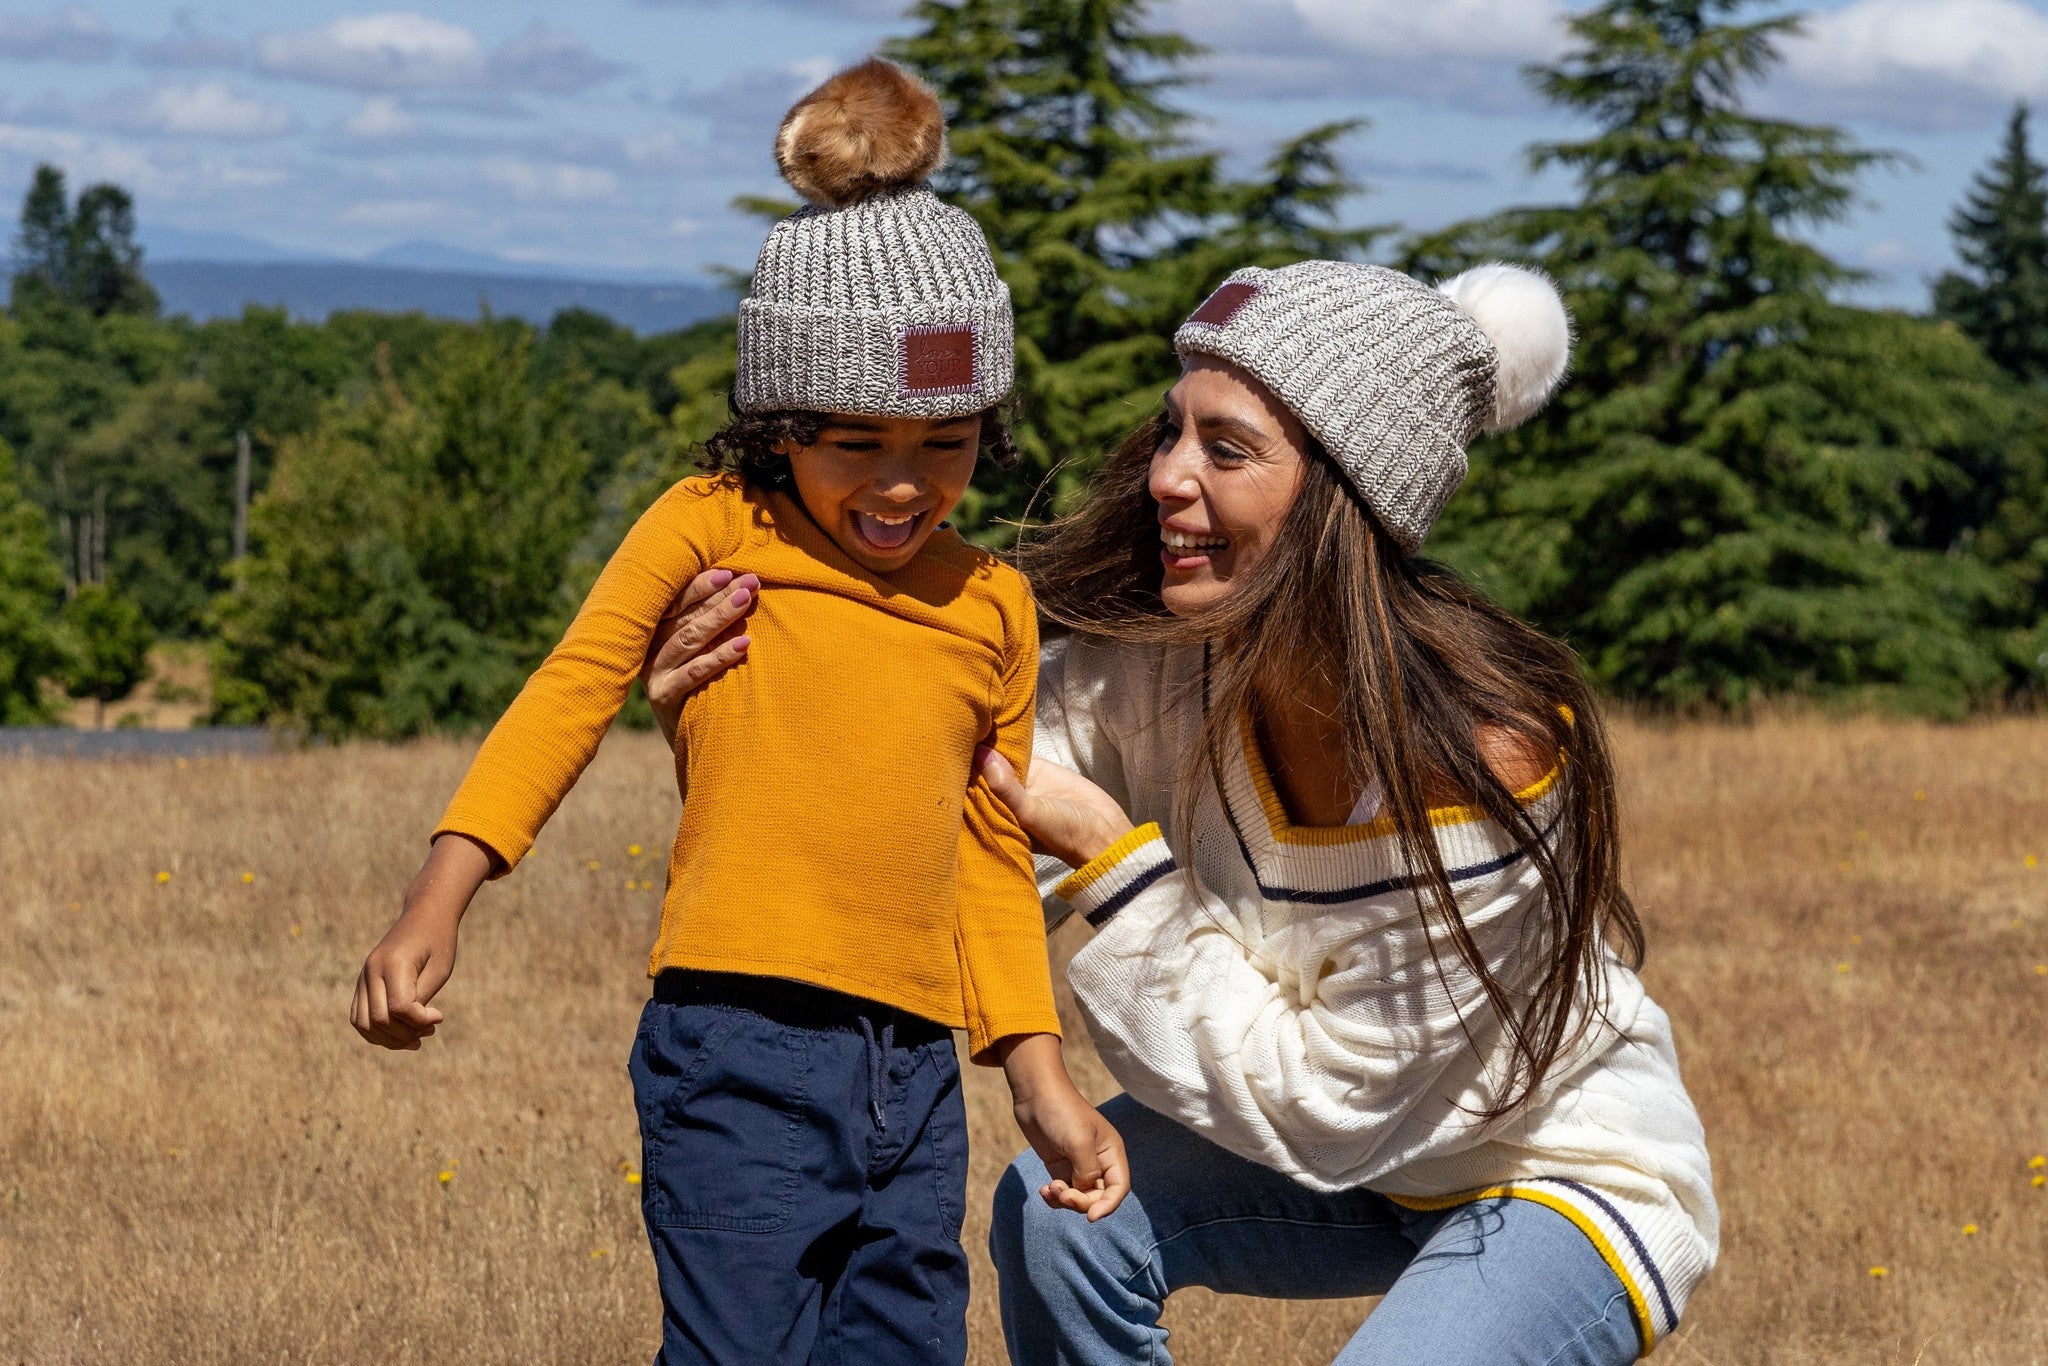 The Label Pom Beanie – Lakes and Grapes